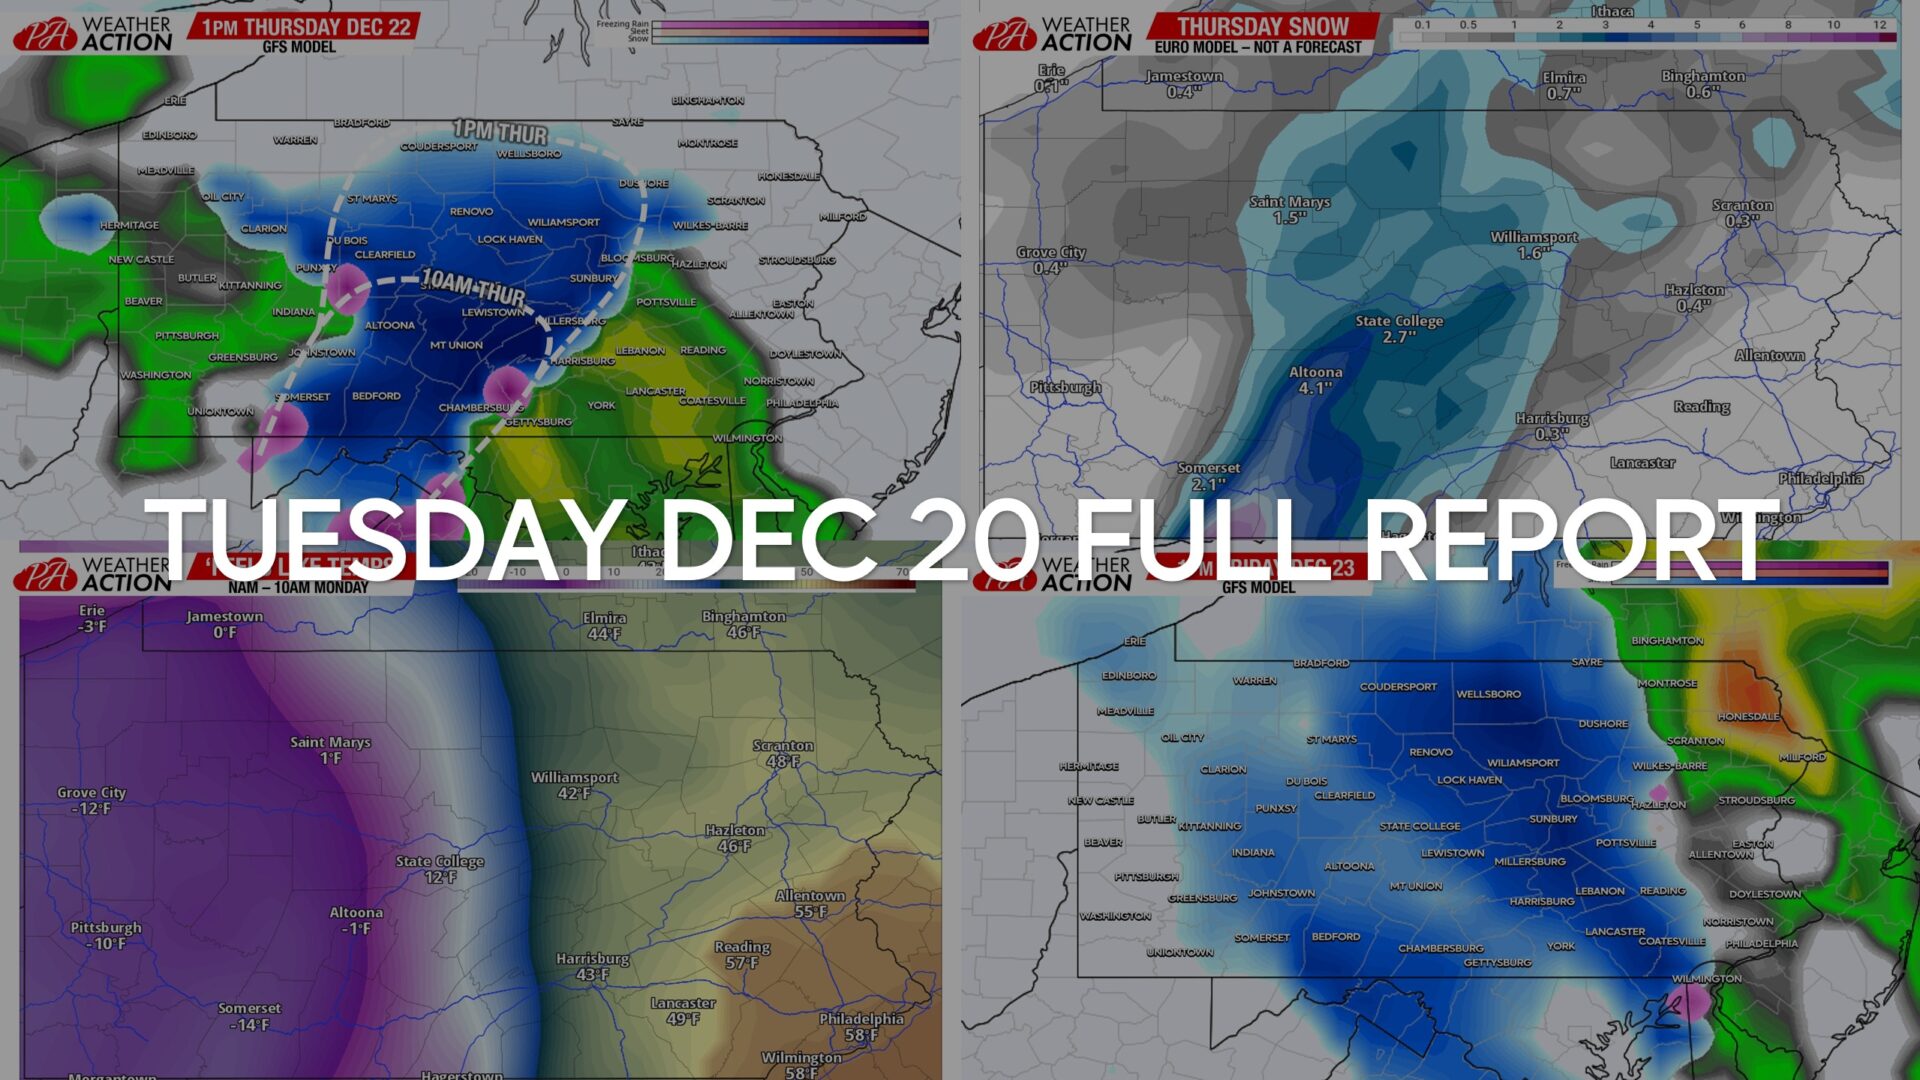 Tuesday December 20 Report: Latest Info for Thursday & Friday Storm Impacts